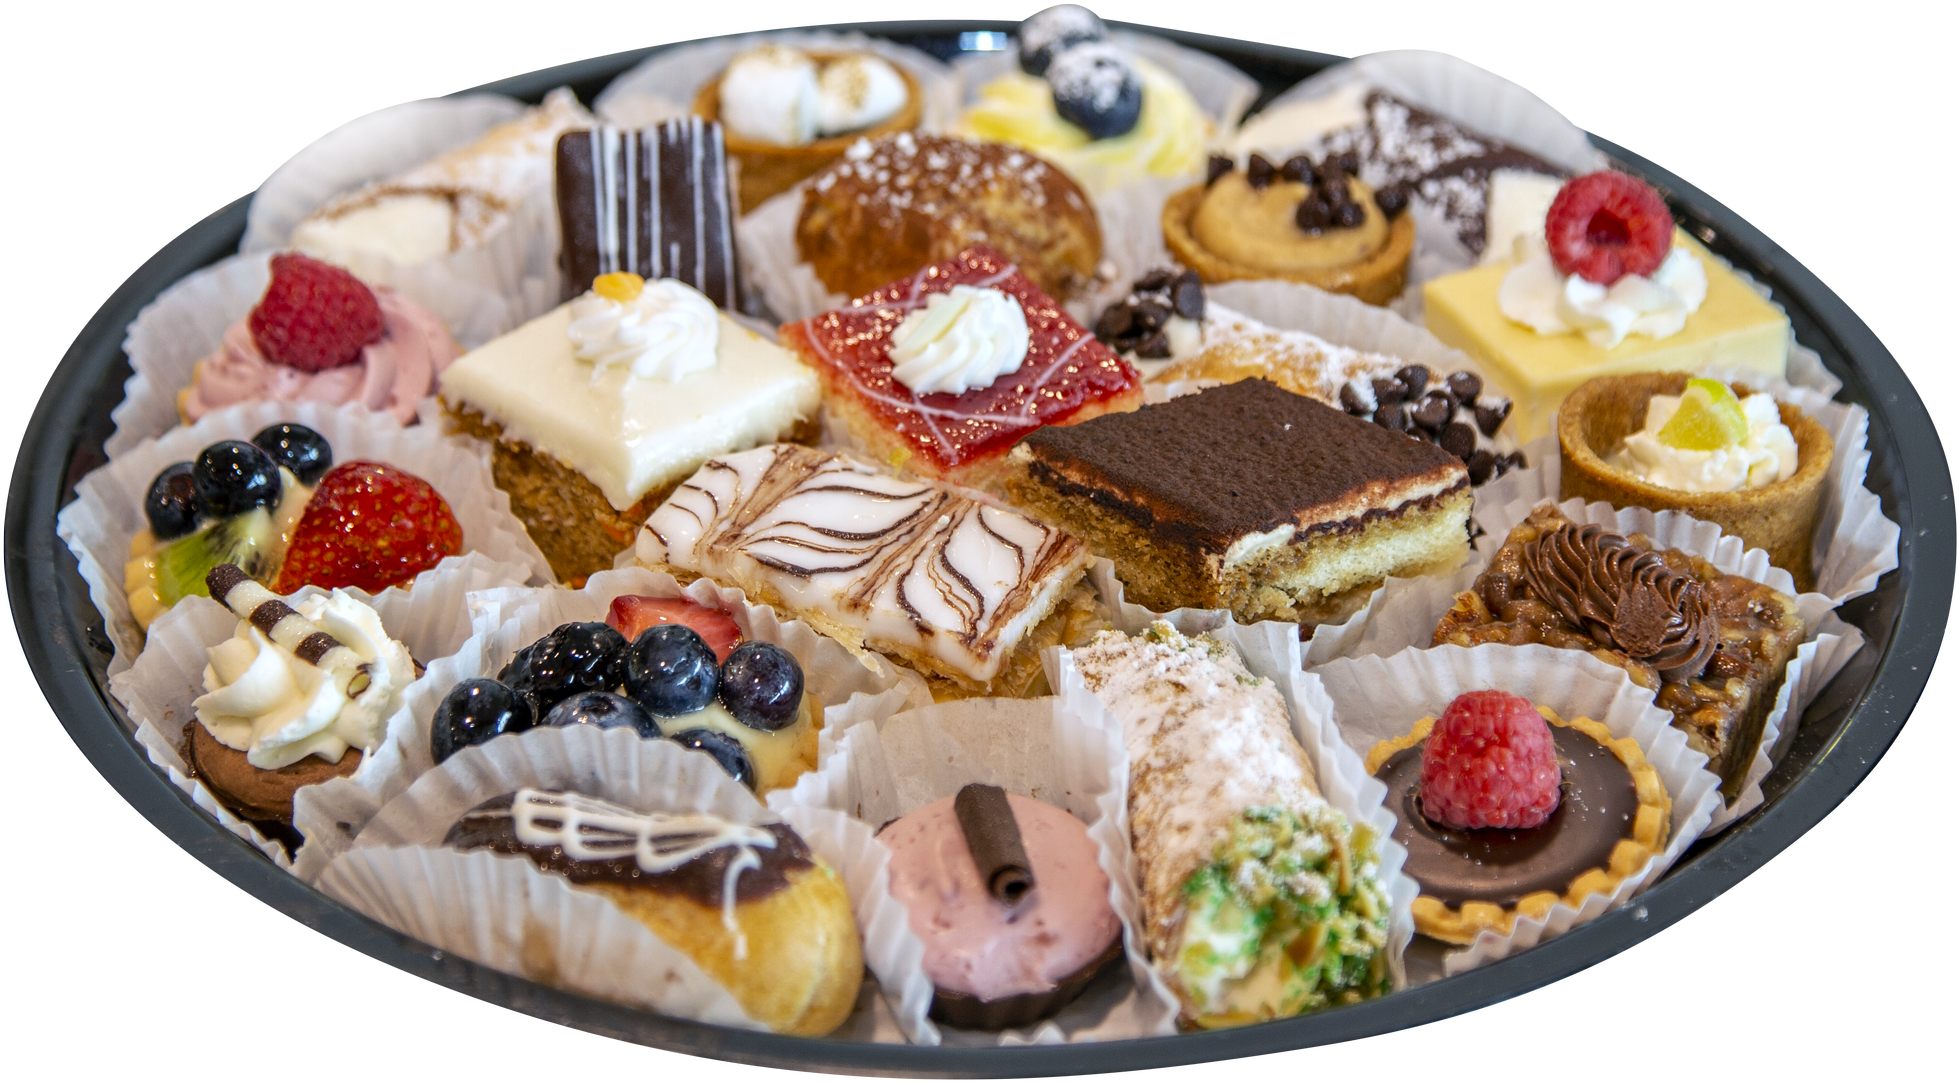 A Tray Of Pastries On A Black Background